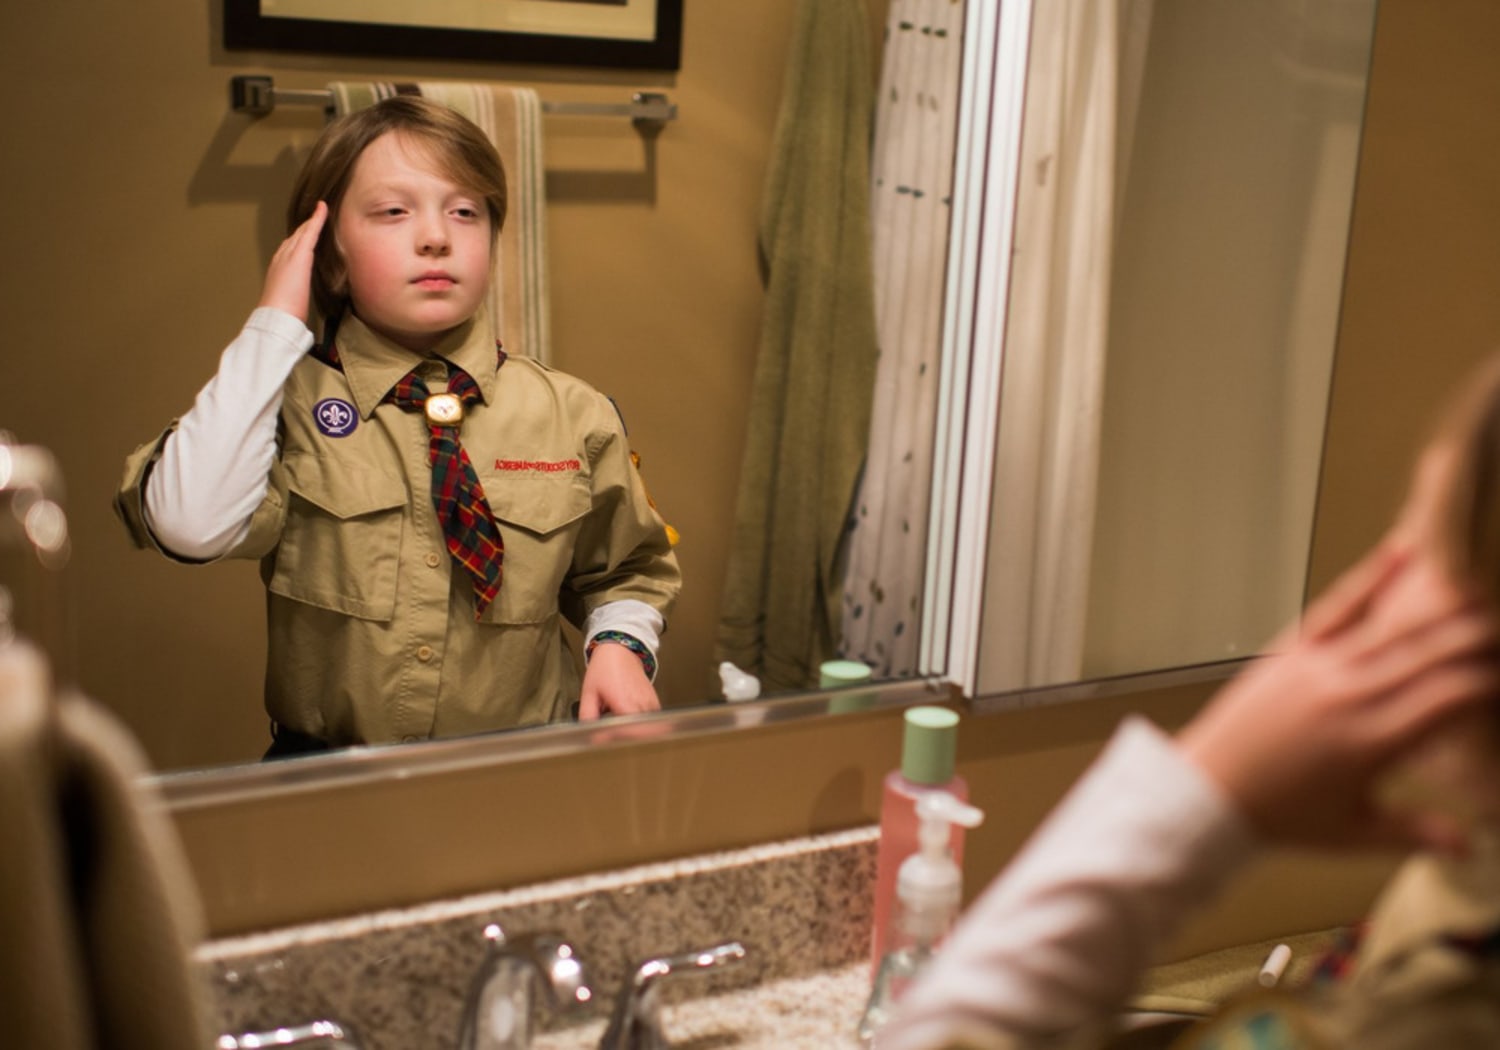 End of an era: Mormons part ways with Boy Scouts